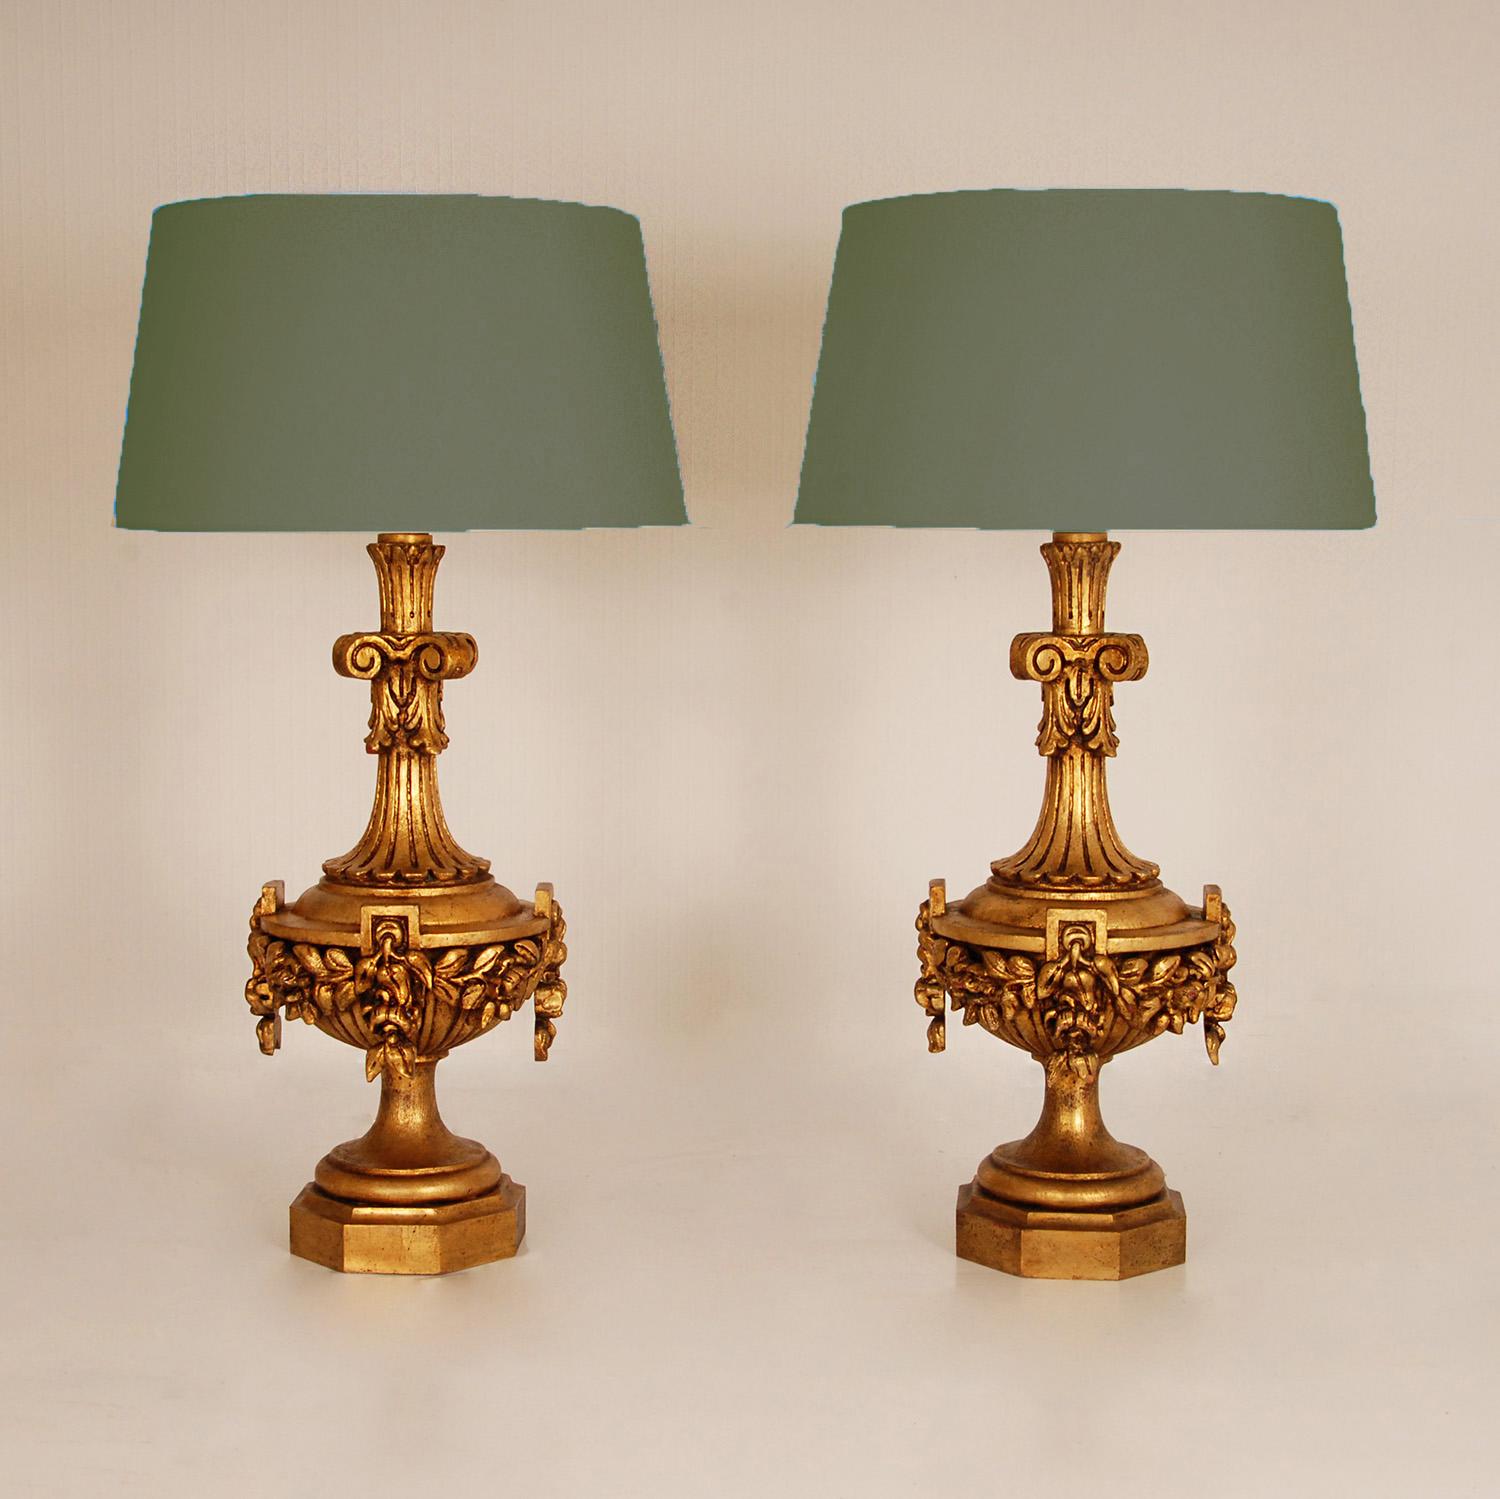 Vintage Italian Gold Giltwood Lamps Carved Neoclassal Vases  Table Lamps a Pair For Sale 6